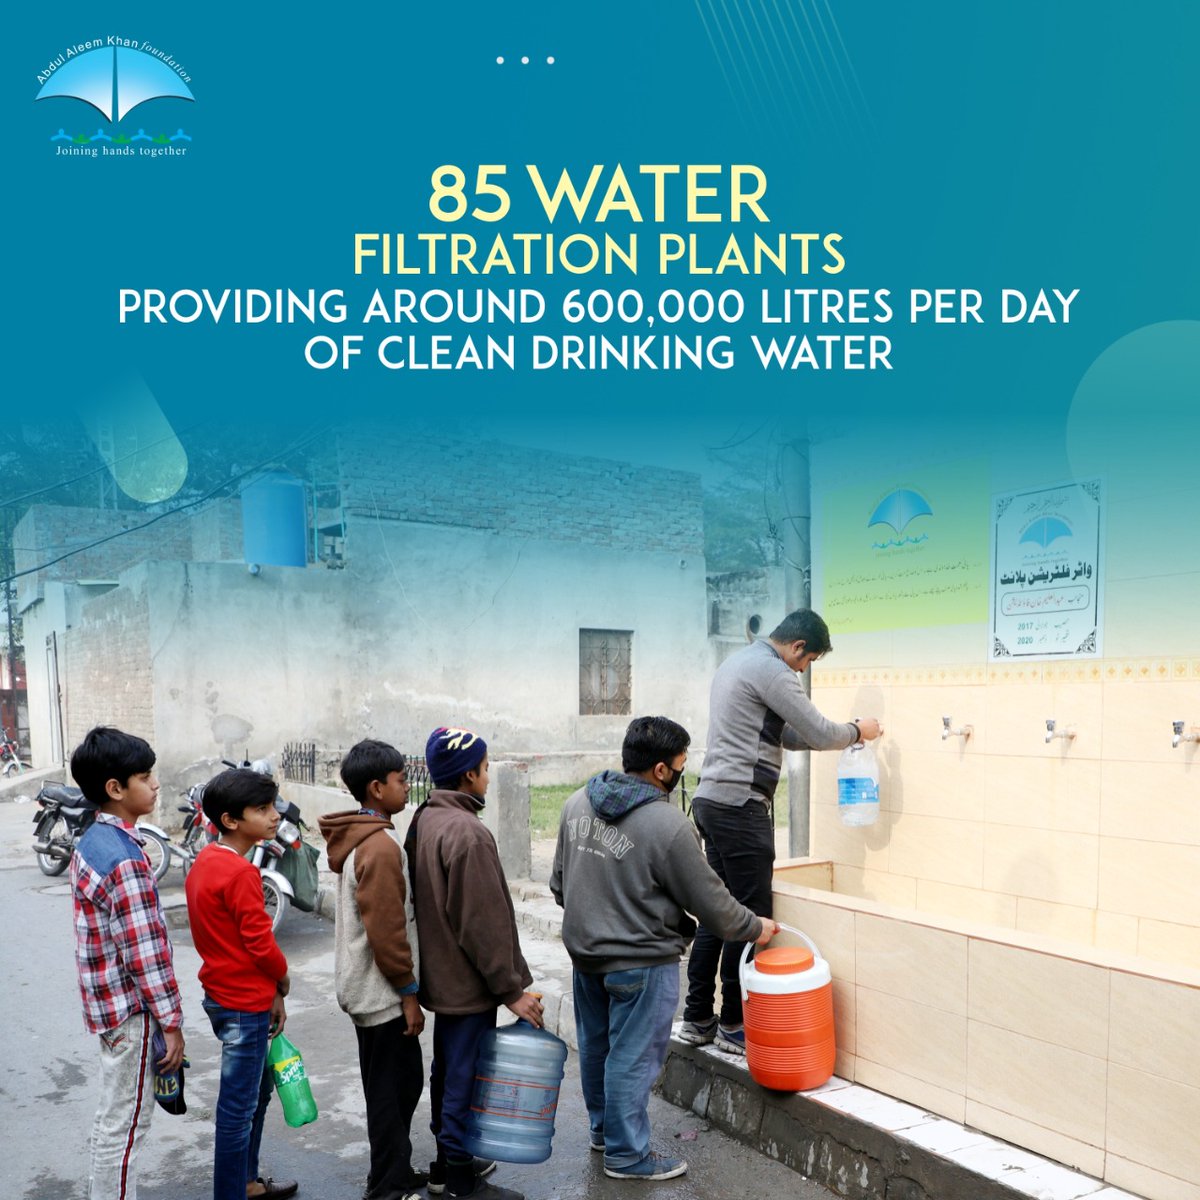 Clean drinking water is essential for good health. Abdul Aleem Khan Foundation is providing about 600,000 litres of clean drinking water daily through more than 85 water filtration plants.
 #AAK_Foundation #WaterFiltrationPlants